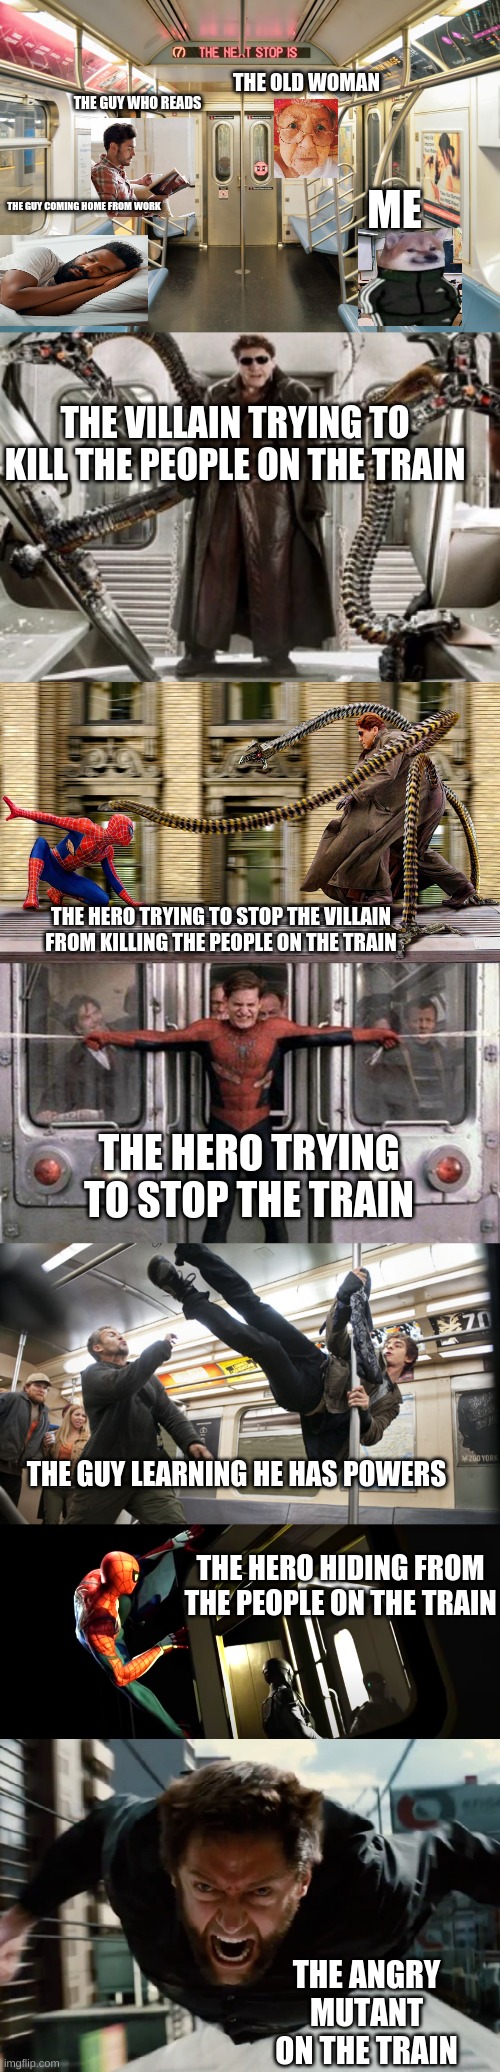 people on trains be like | THE OLD WOMAN; THE GUY WHO READS; ME; THE GUY COMING HOME FROM WORK; THE VILLAIN TRYING TO KILL THE PEOPLE ON THE TRAIN; THE HERO TRYING TO STOP THE VILLAIN FROM KILLING THE PEOPLE ON THE TRAIN; THE HERO TRYING TO STOP THE TRAIN; THE GUY LEARNING HE HAS POWERS; THE HERO HIDING FROM THE PEOPLE ON THE TRAIN; THE ANGRY MUTANT ON THE TRAIN | image tagged in train,spiderman | made w/ Imgflip meme maker